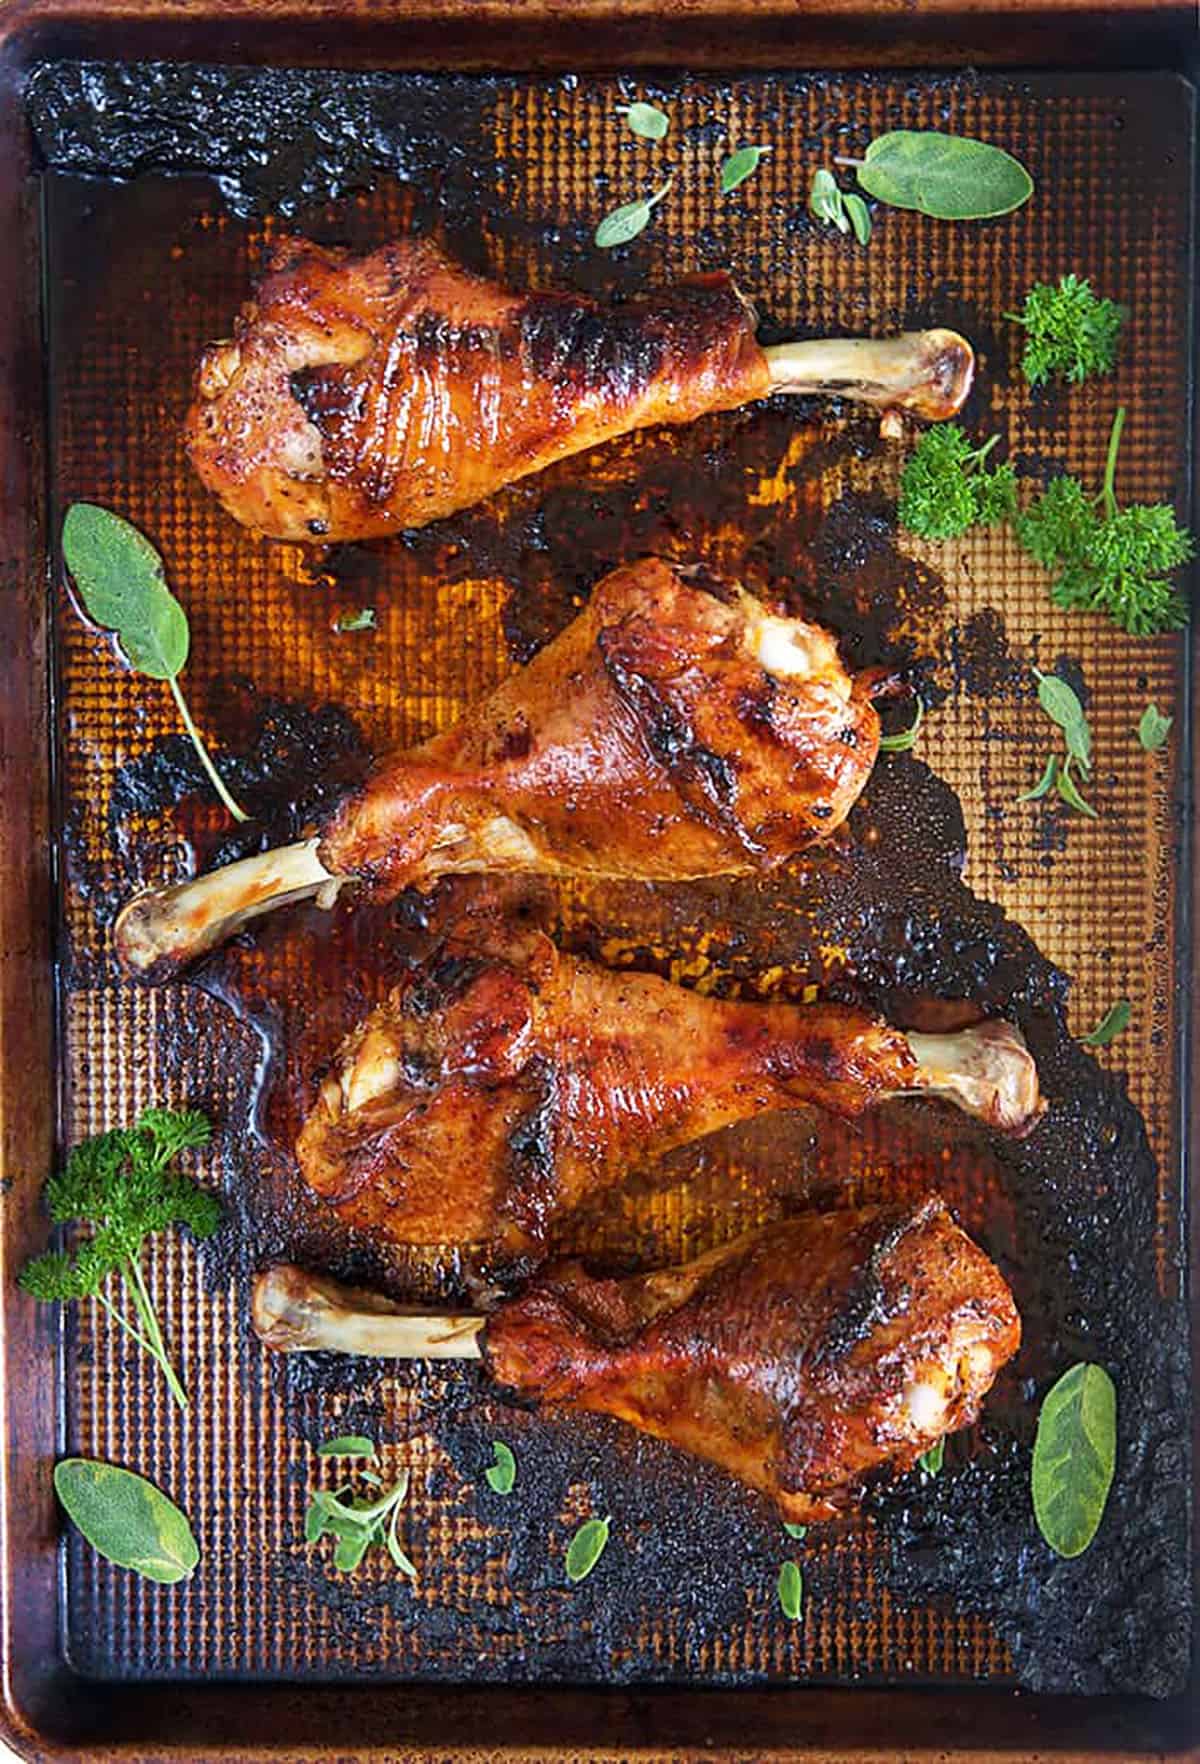 Four roasted turkey legs are on a baking sheet.